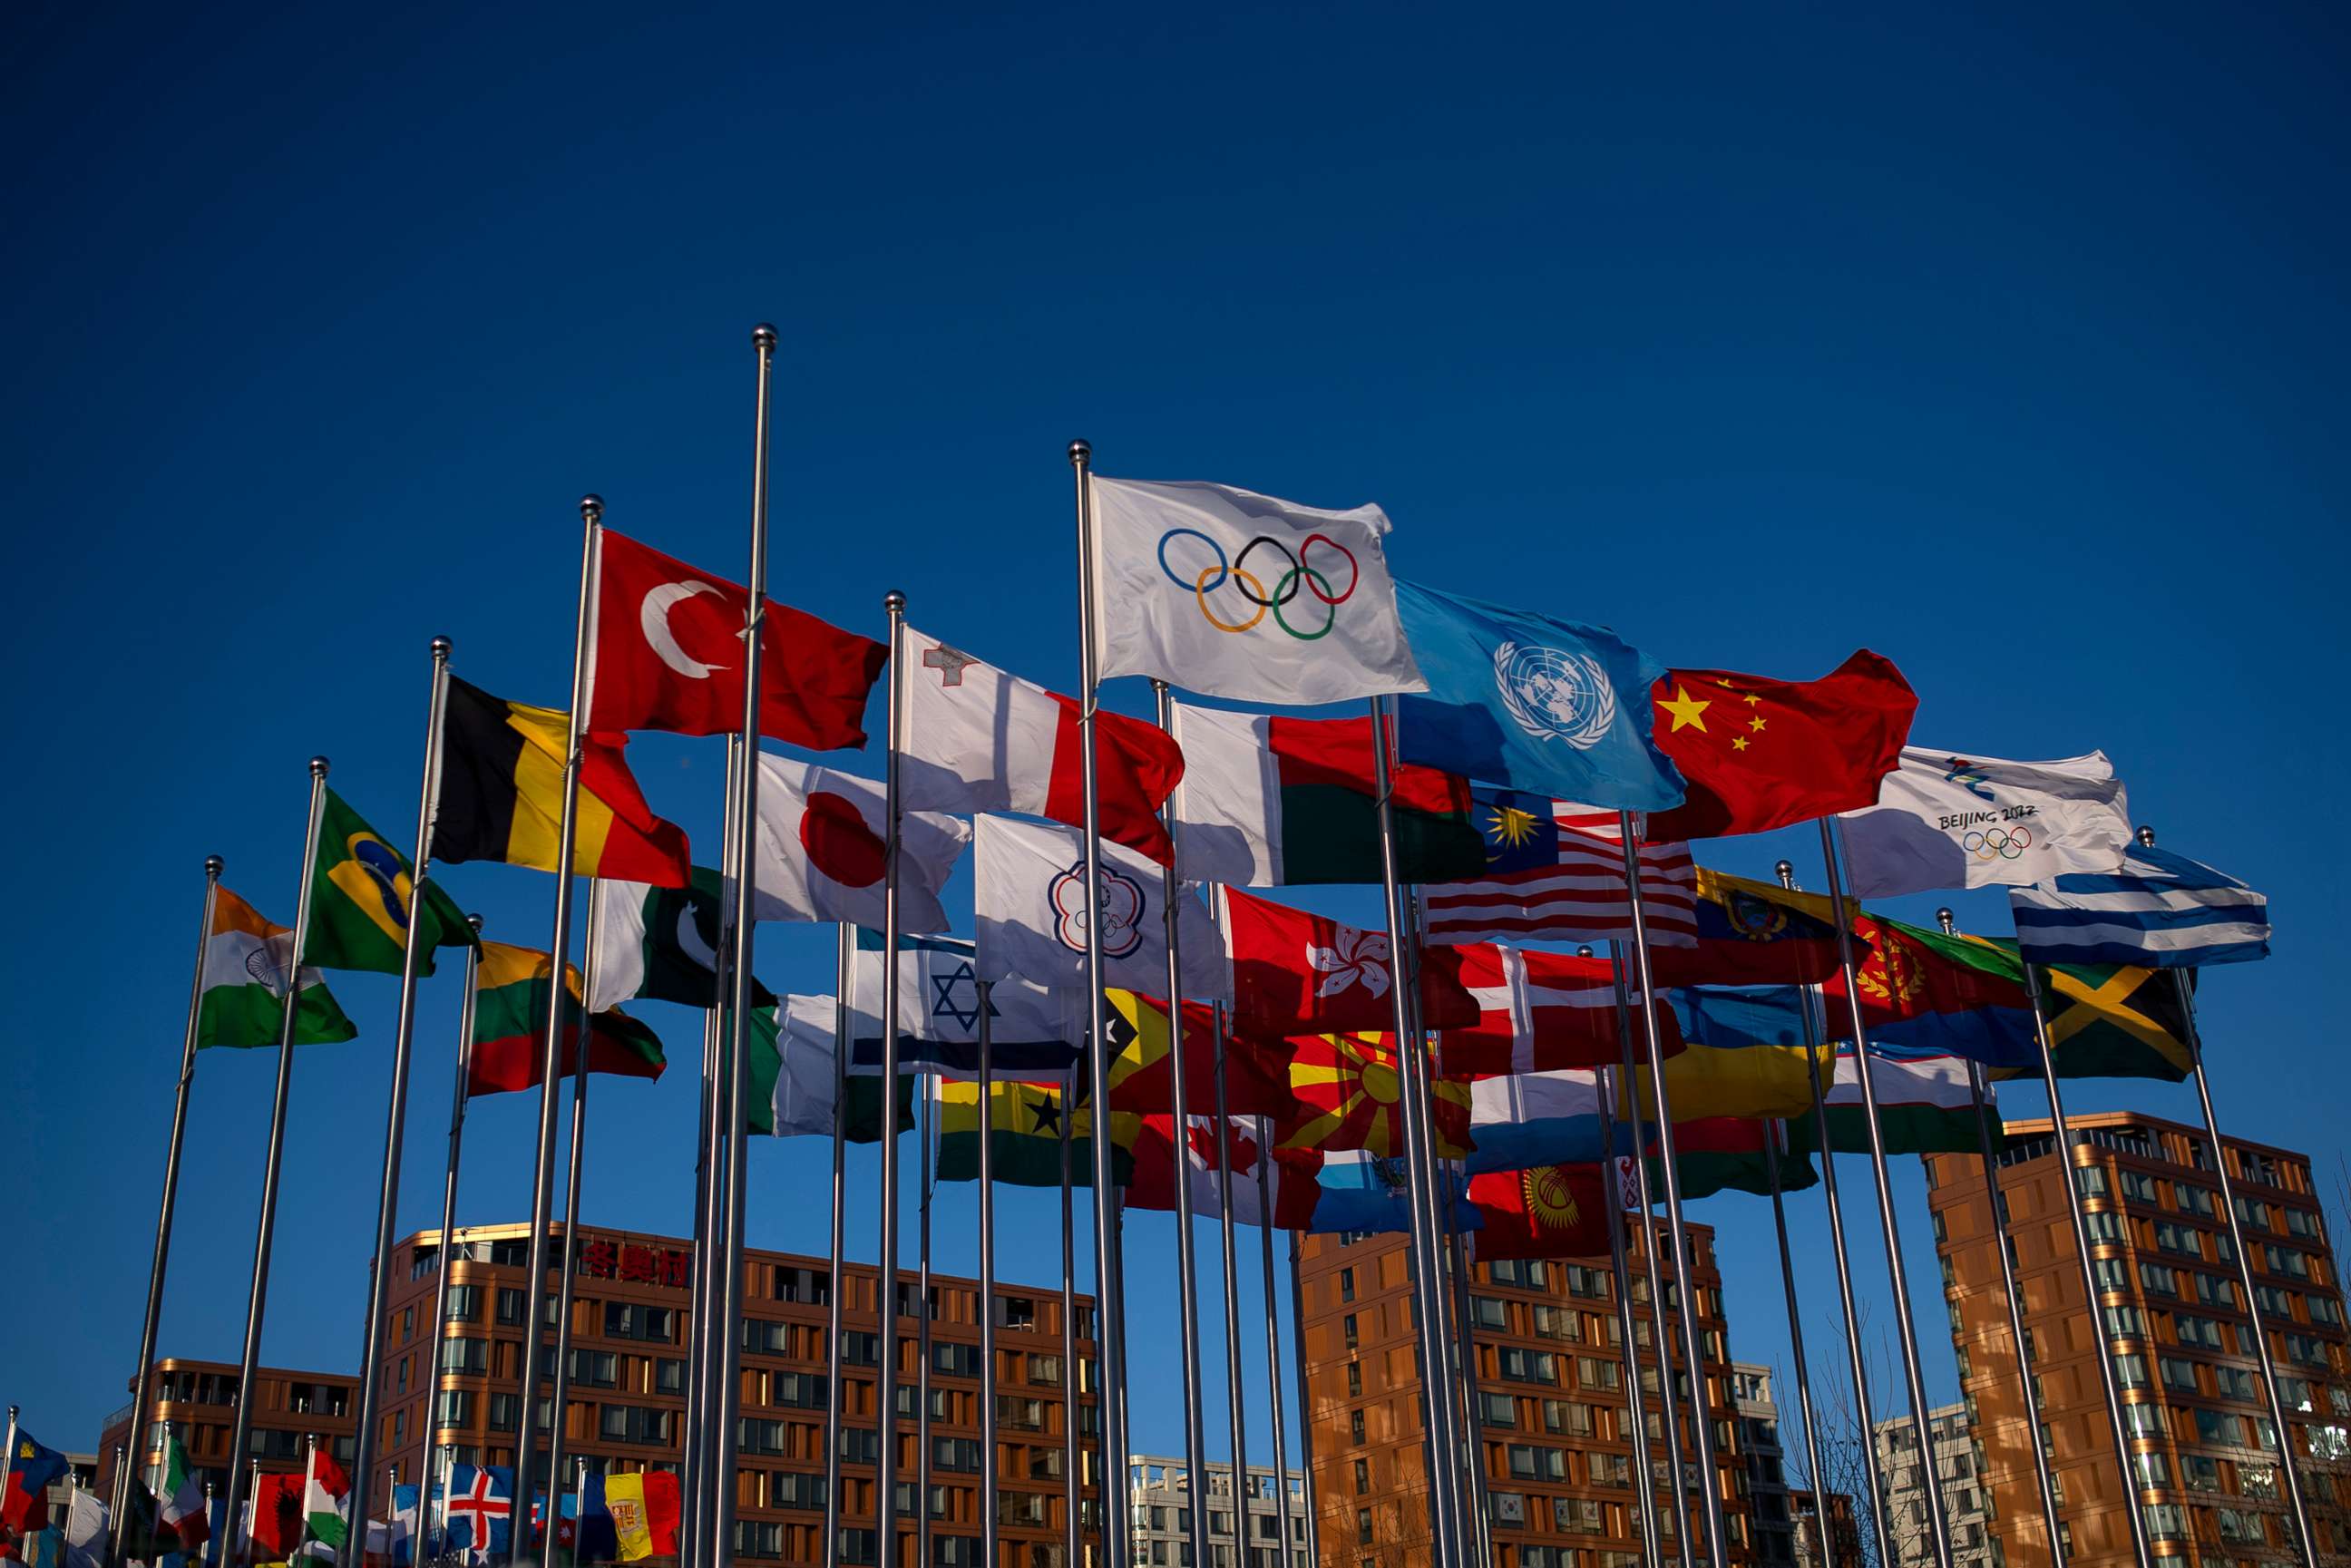 PHOTO: Flags fly outside the Olympic Village ahead of the Beijing Winter Olympics, Feb. 3, 2022 in Beijing.